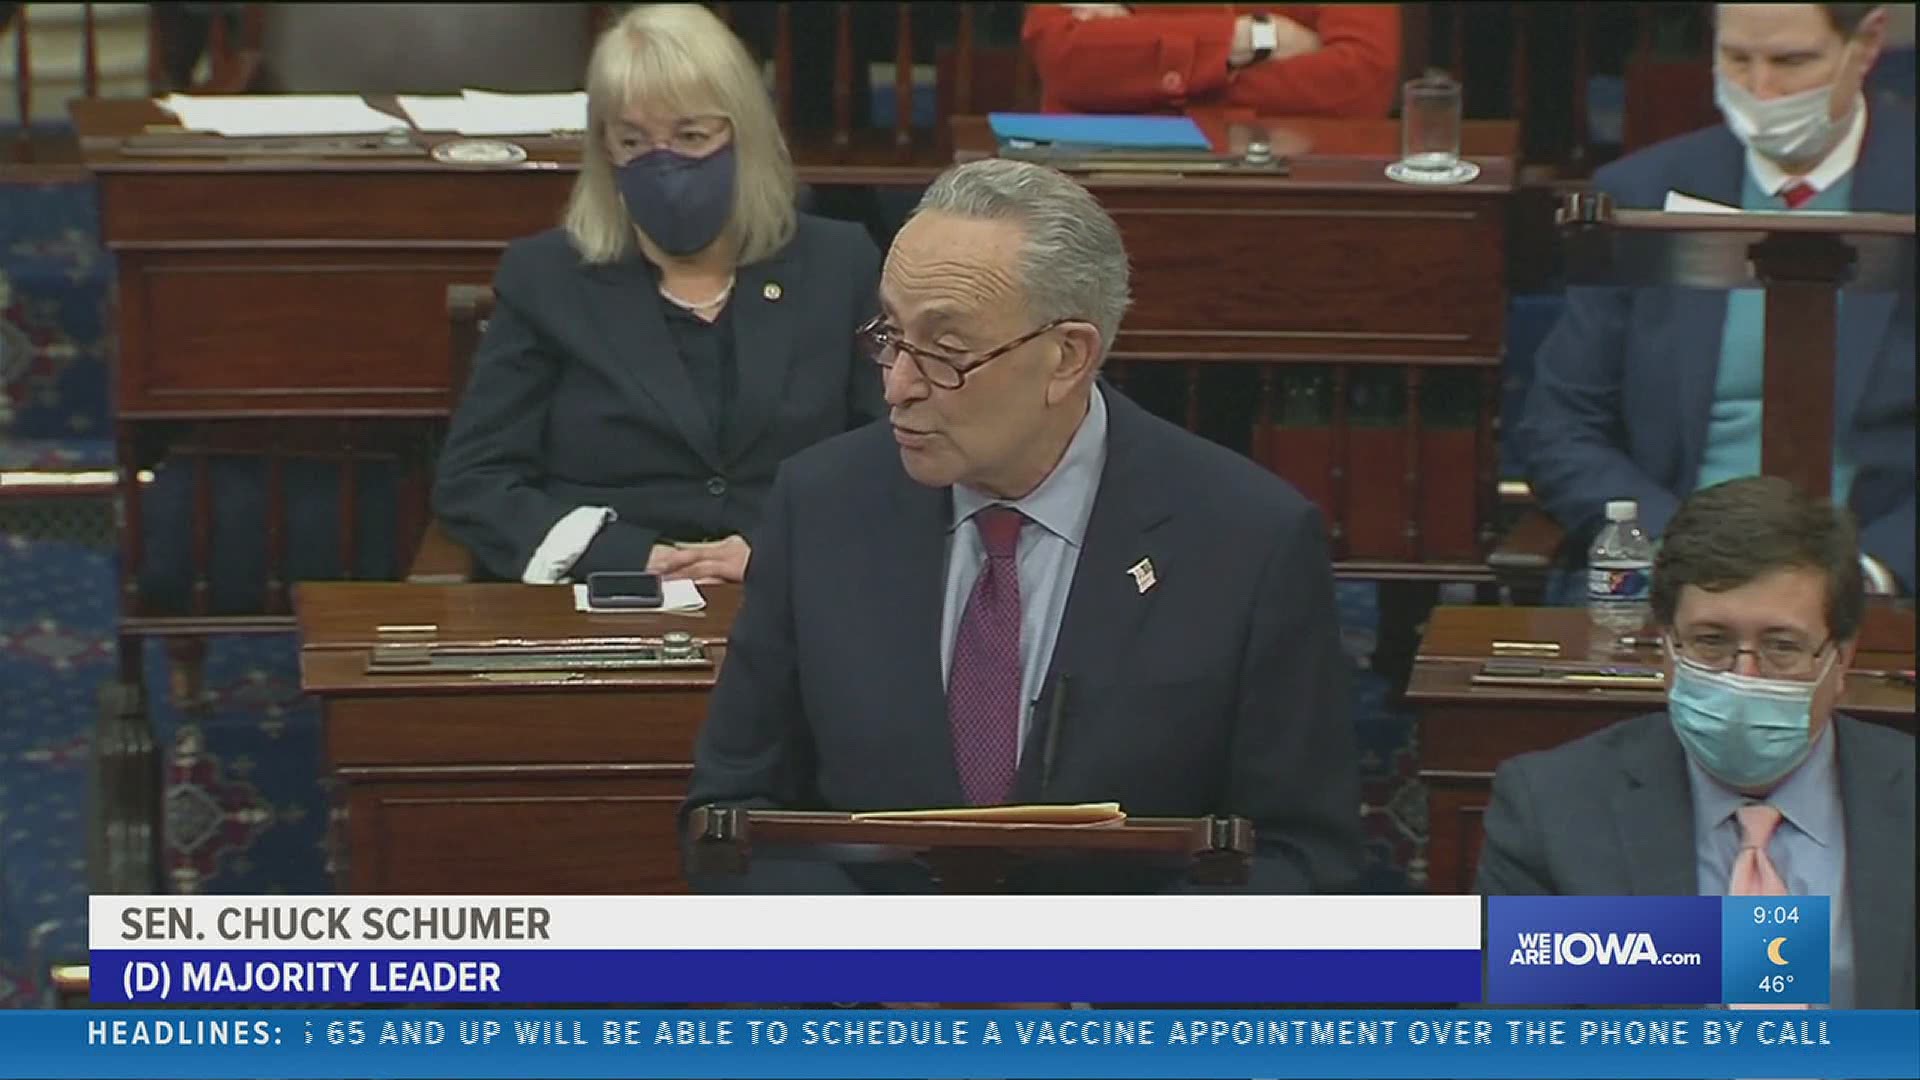 President Biden and the Democrats prevailed as a divided Senate approved the $1.9 trillion COVID-19 relief bill, sending it back to the House for final passage.